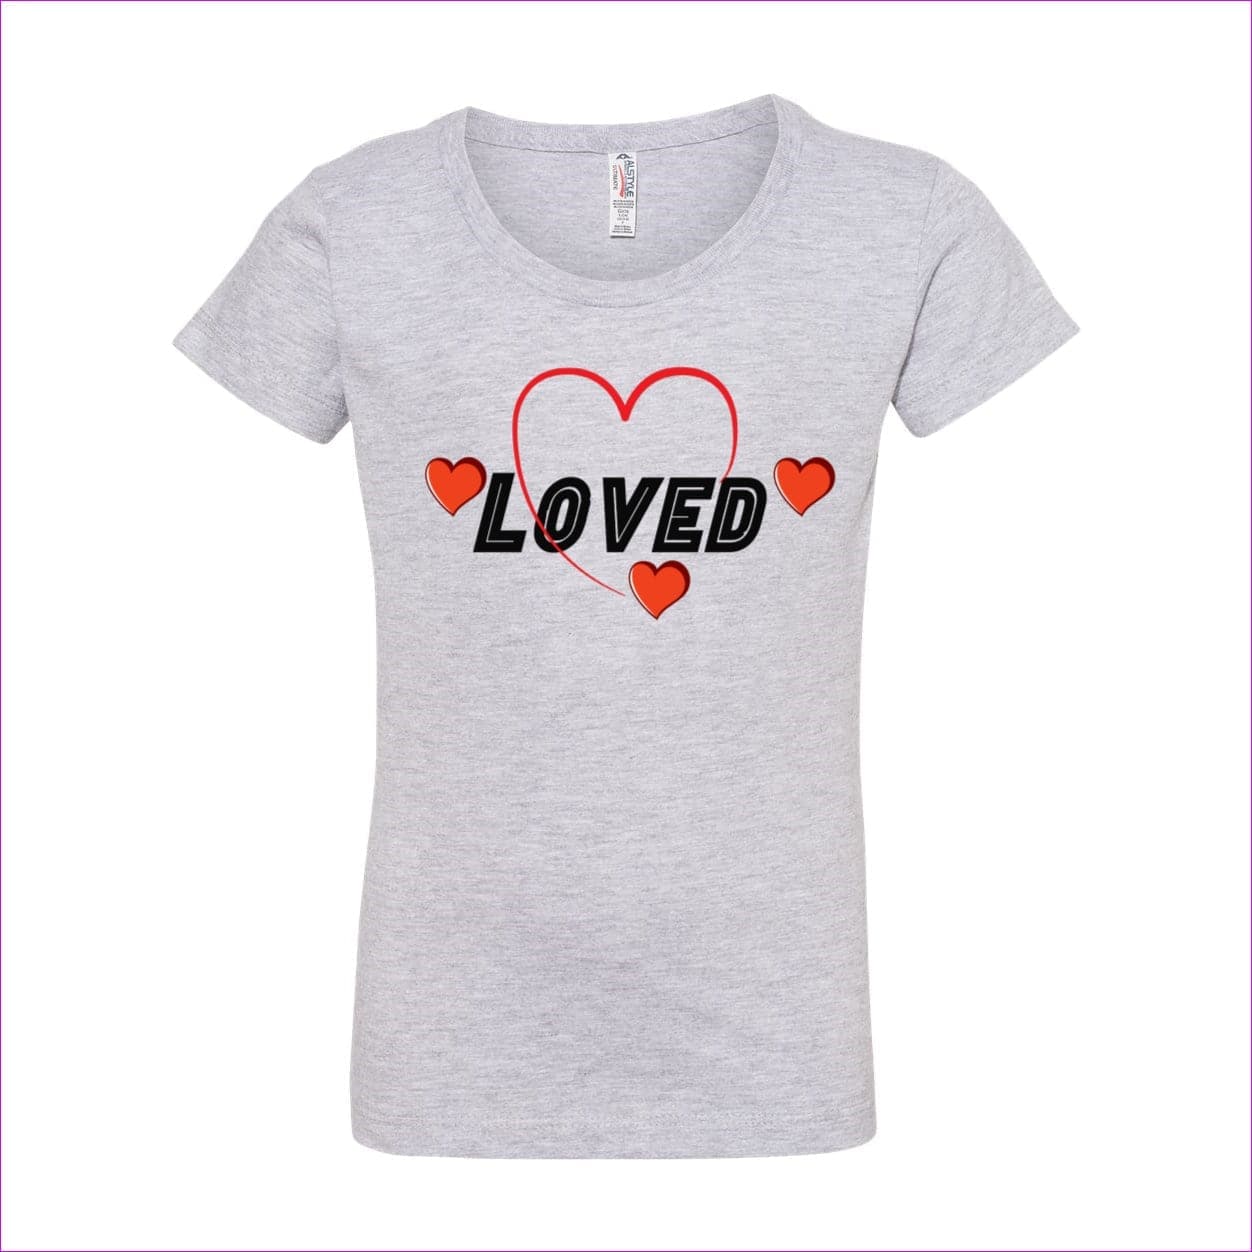 Sport Grey - Loved Girls’ Ultimate T-Shirt - kids t-shirts at TFC&H Co.